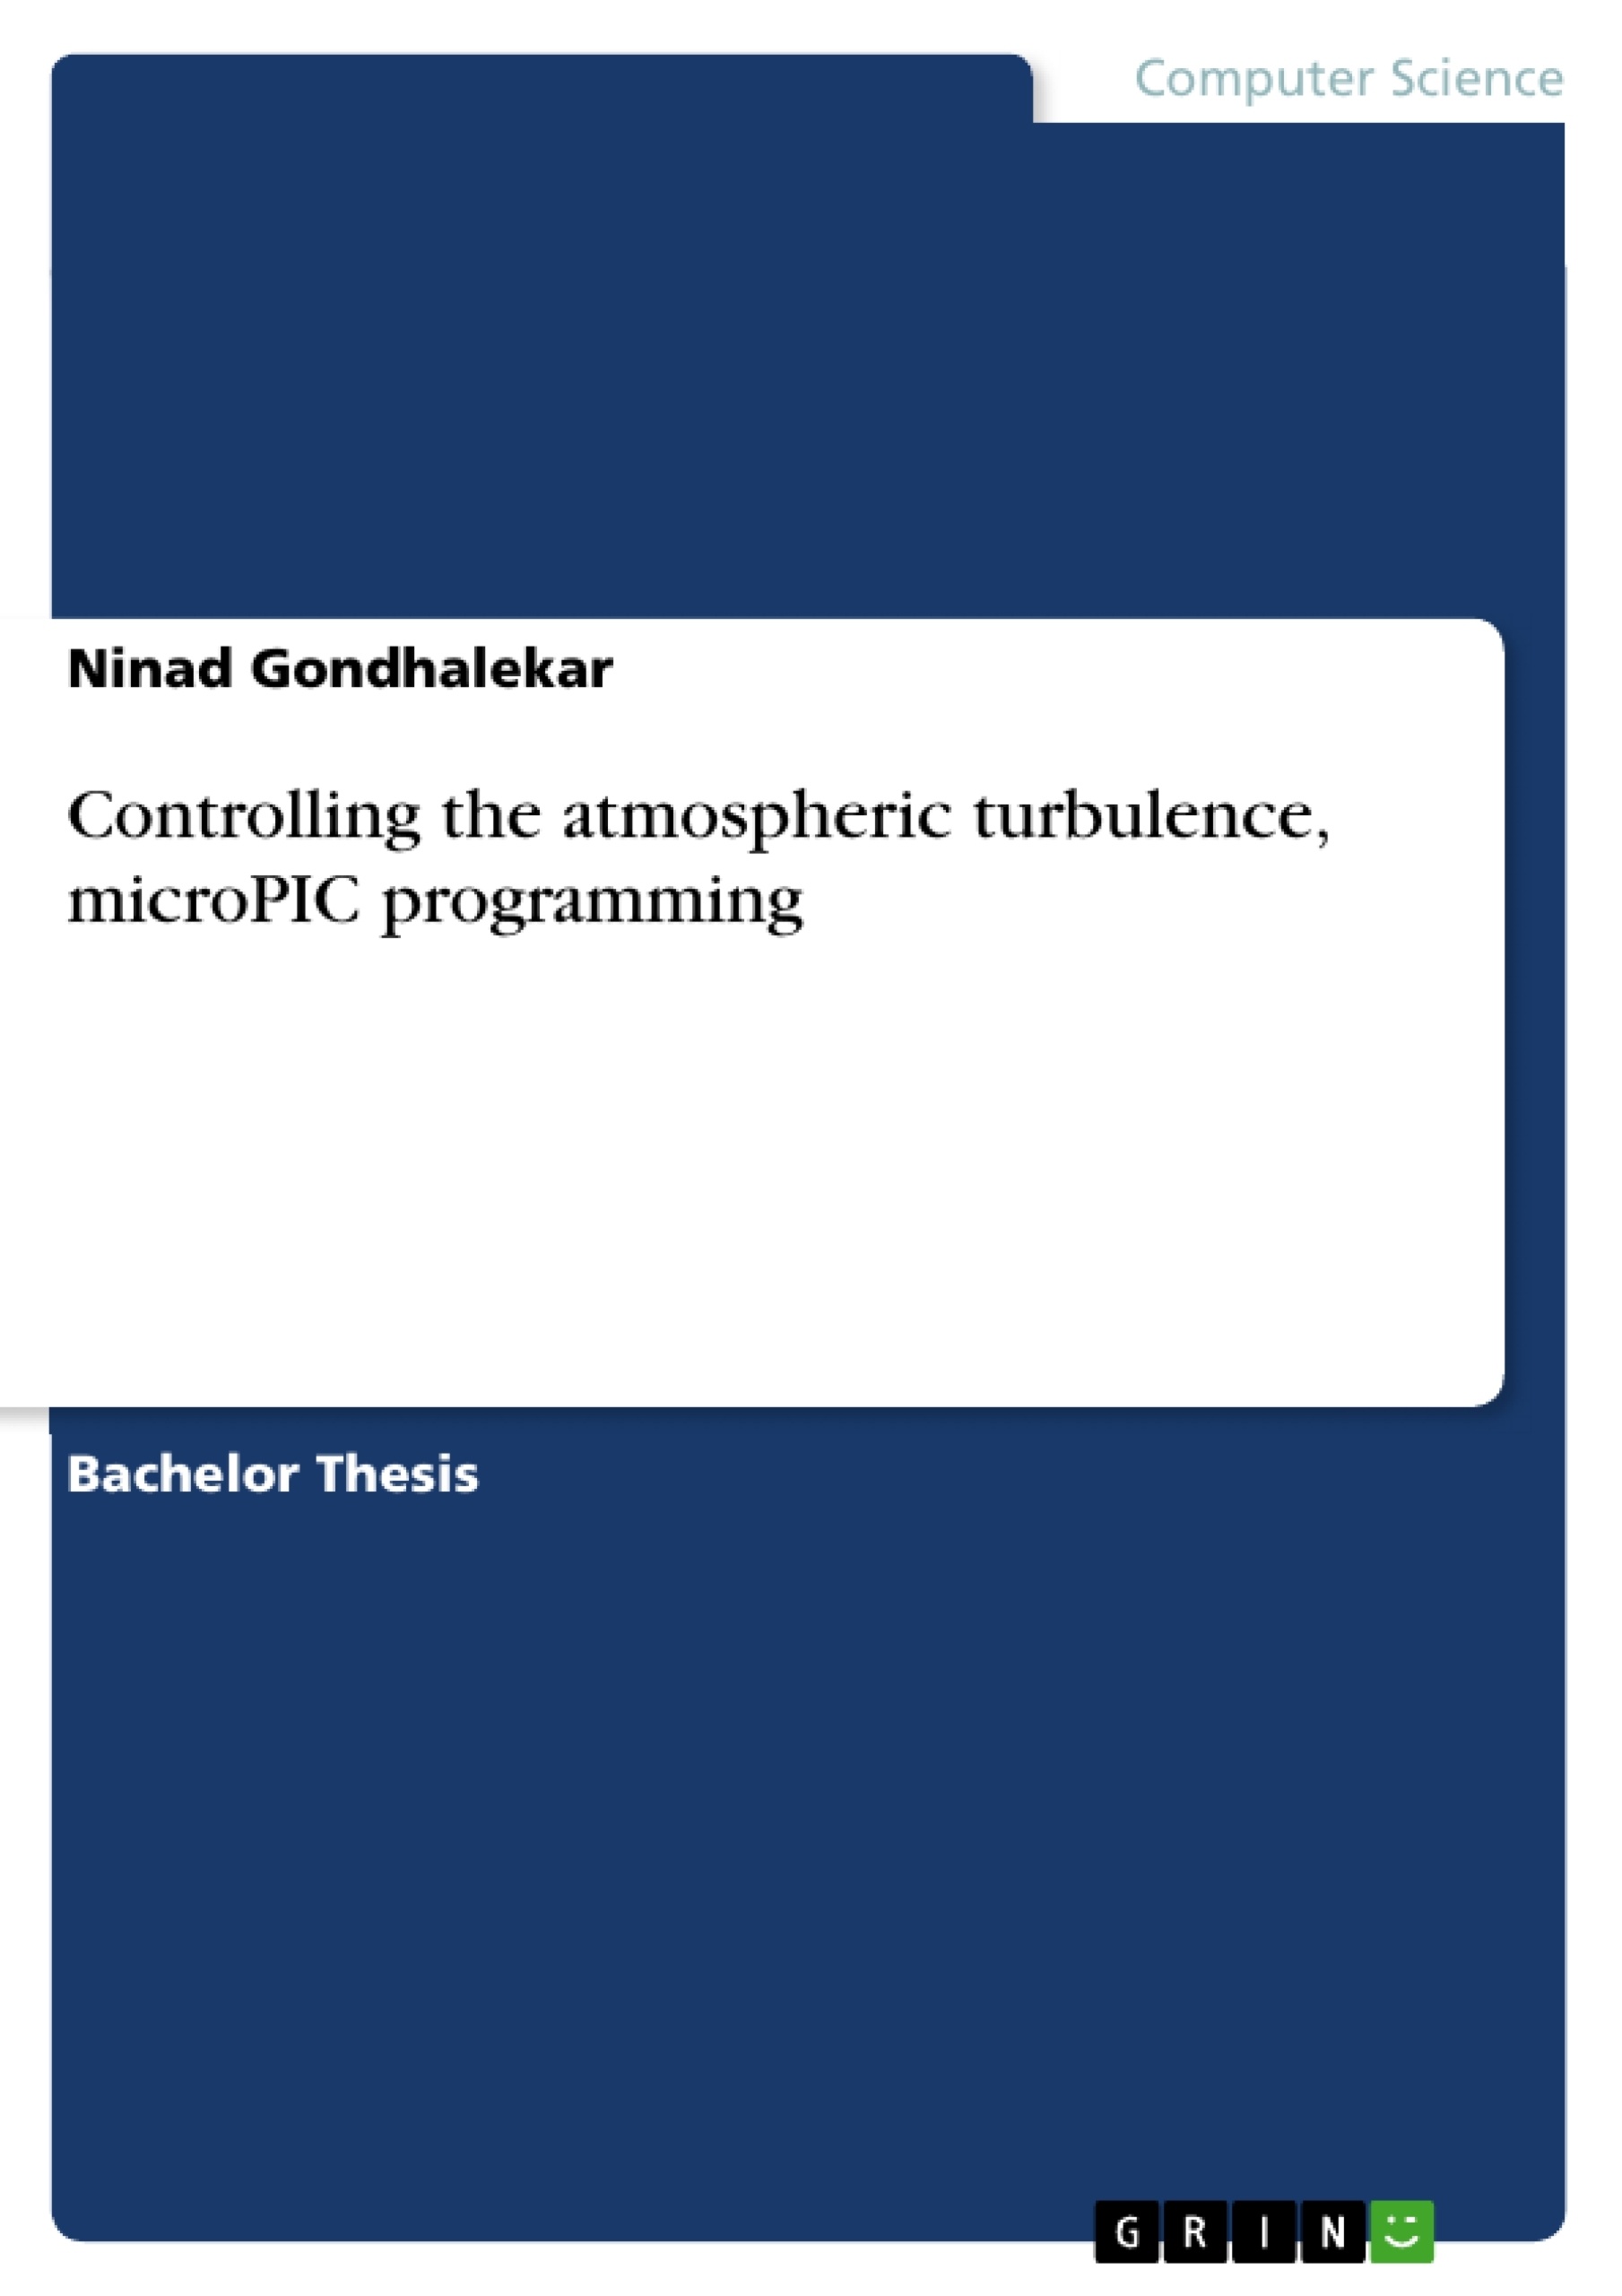 Título: Controlling the atmospheric turbulence, microPIC programming